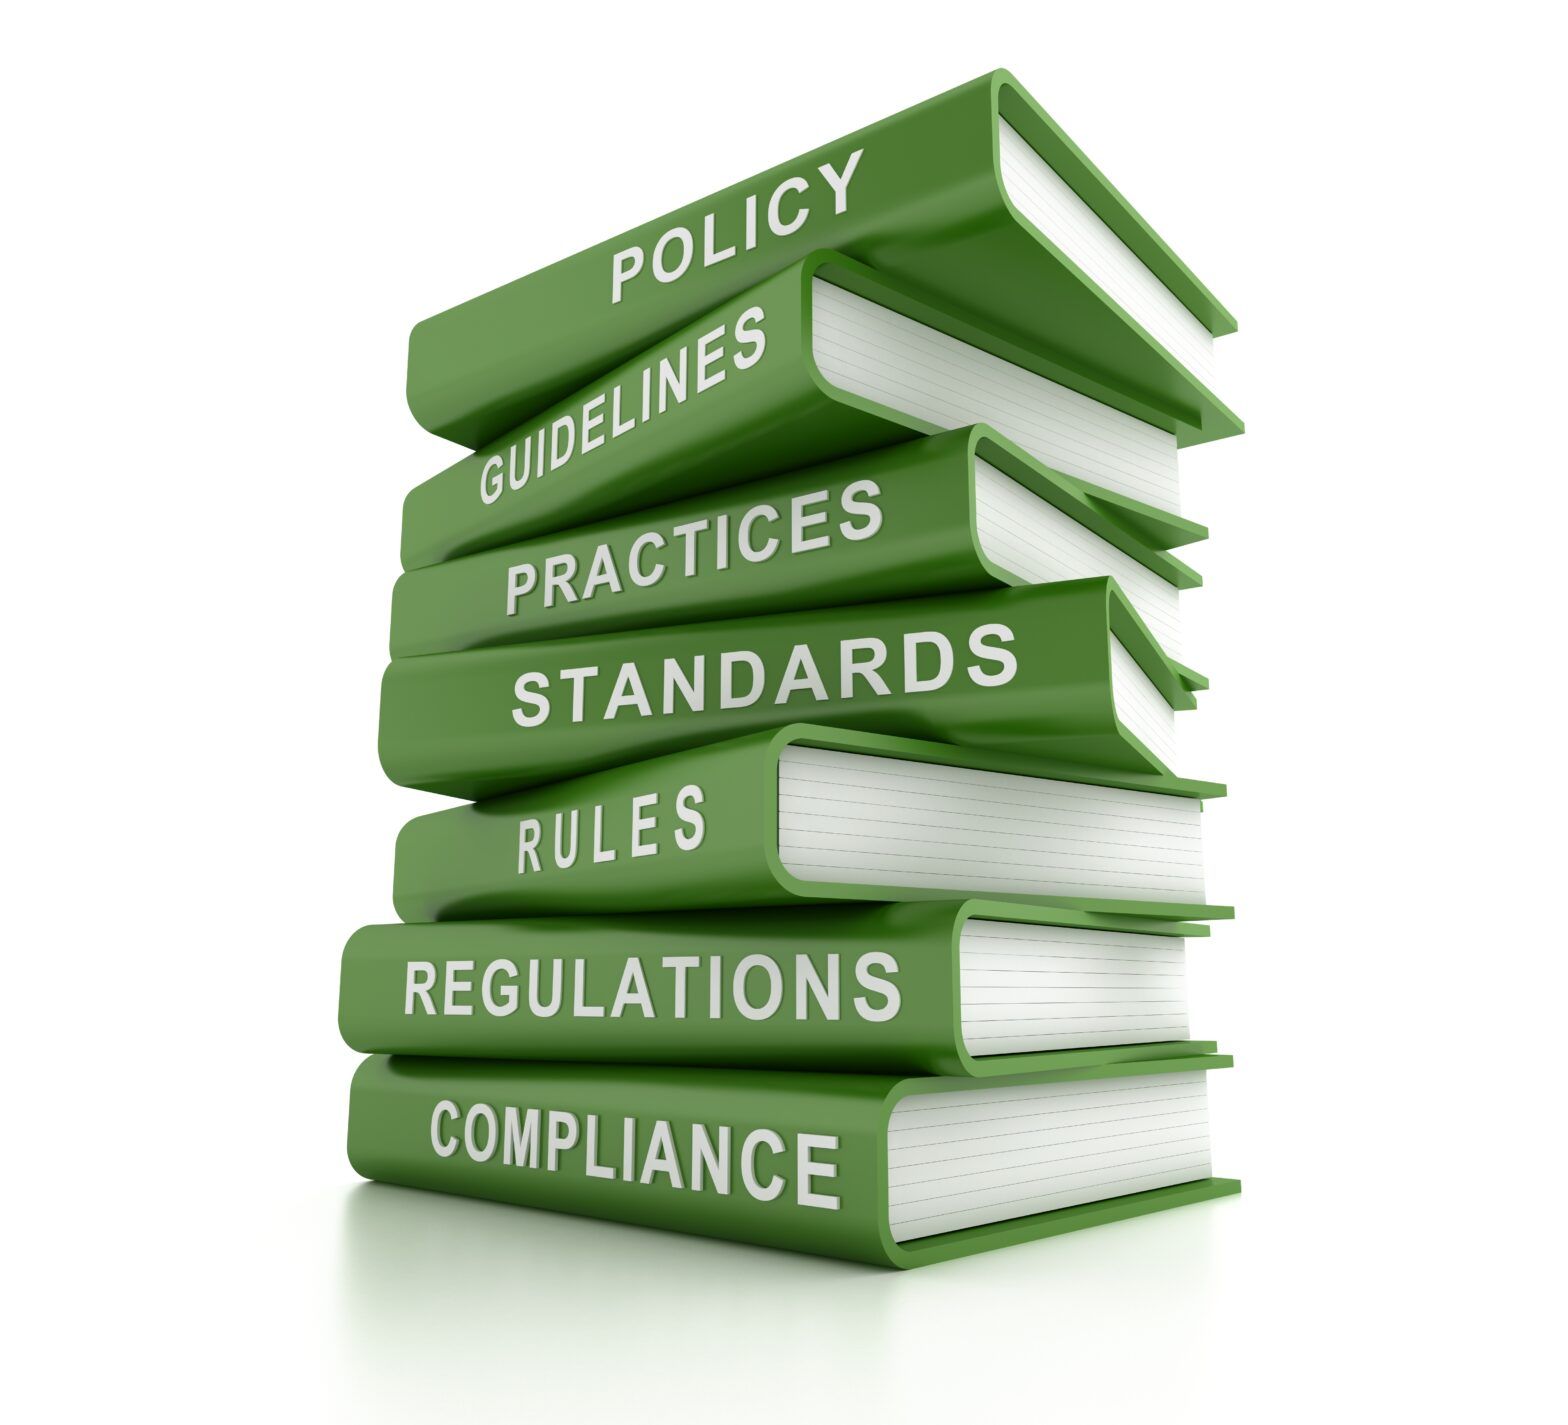 SFDR Level 2 standards go live after string of Article 9 downgrades